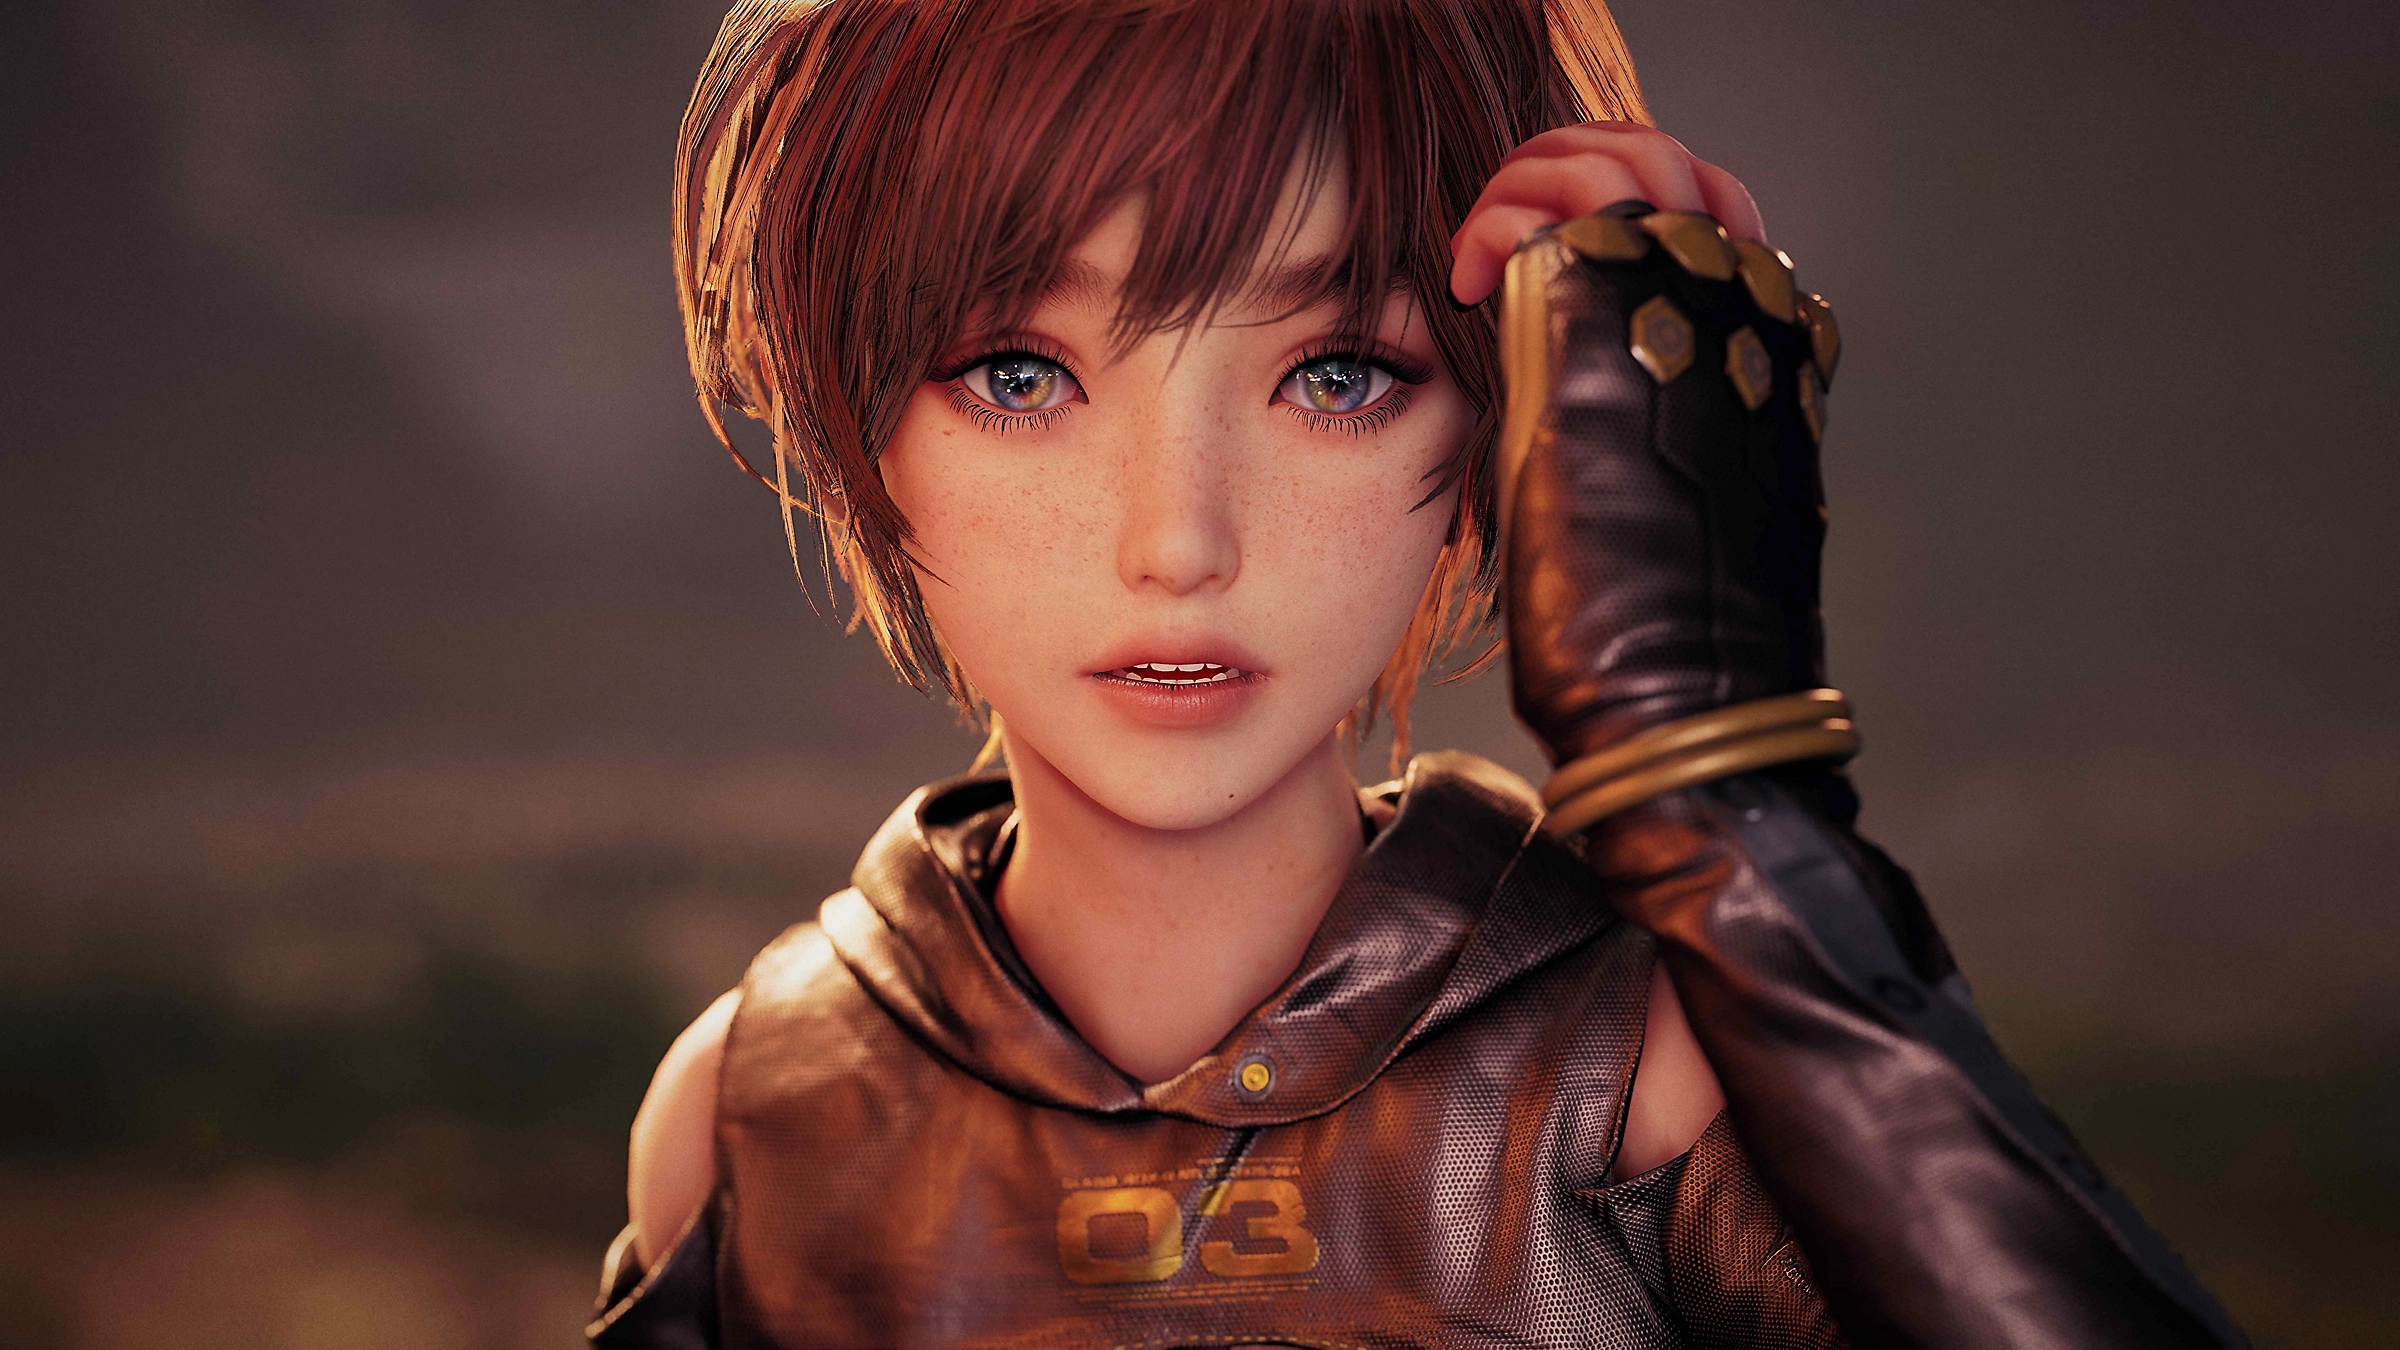 is Stellar Blade coming to pc: Close up shows a character from Stellar Blade with brown hair